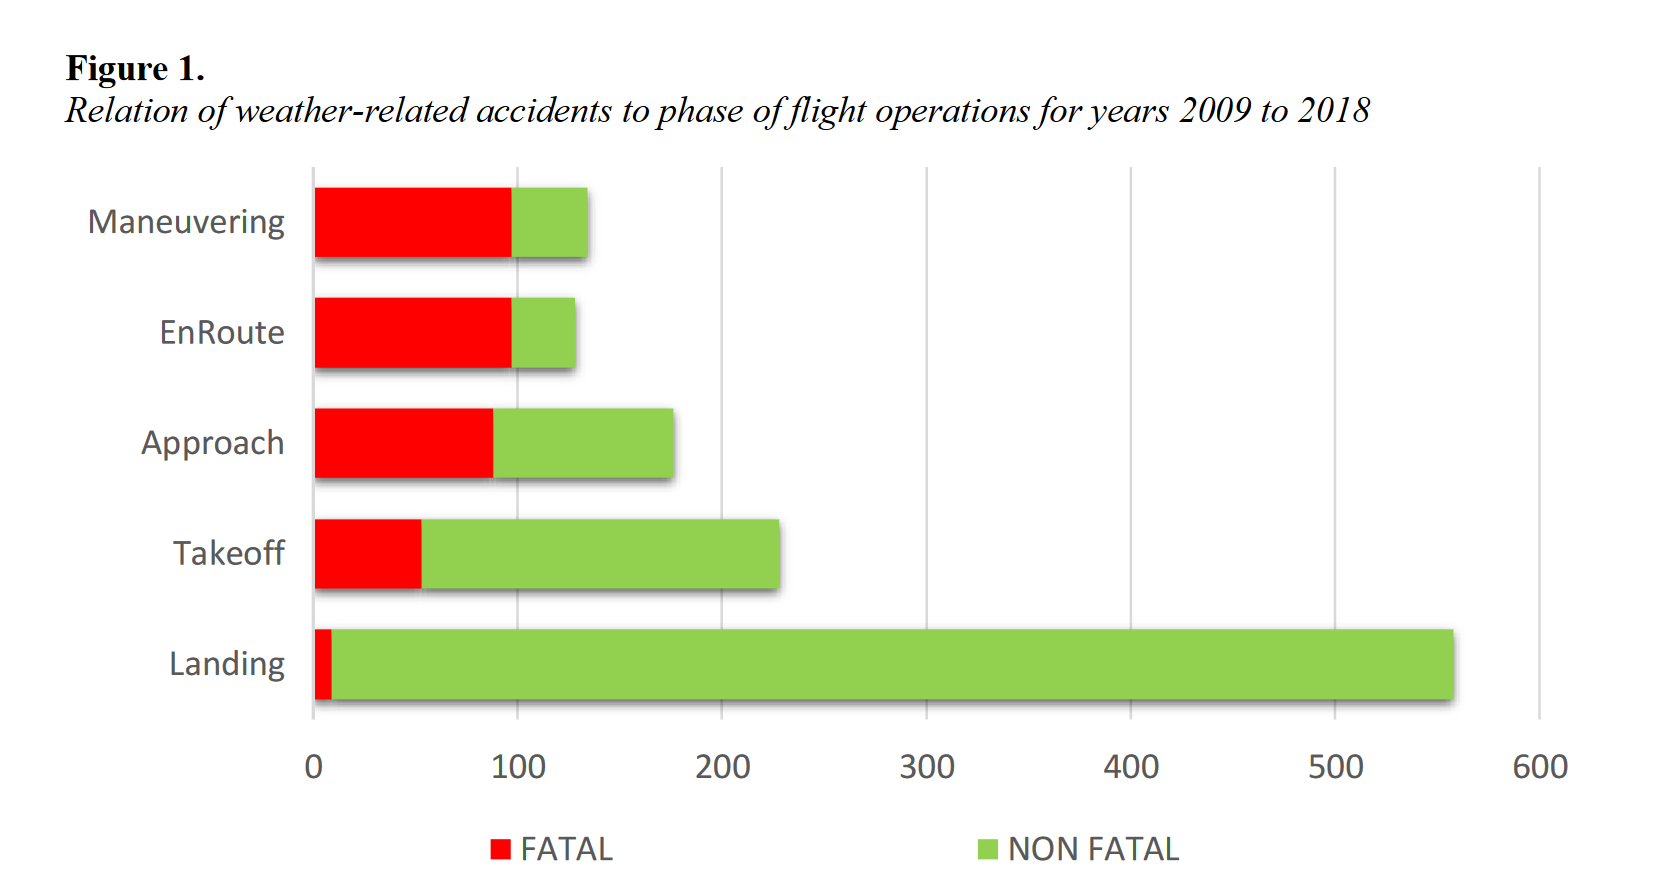 Relation of weather-related accidents to phase of flight operations for years 2009 to 2018